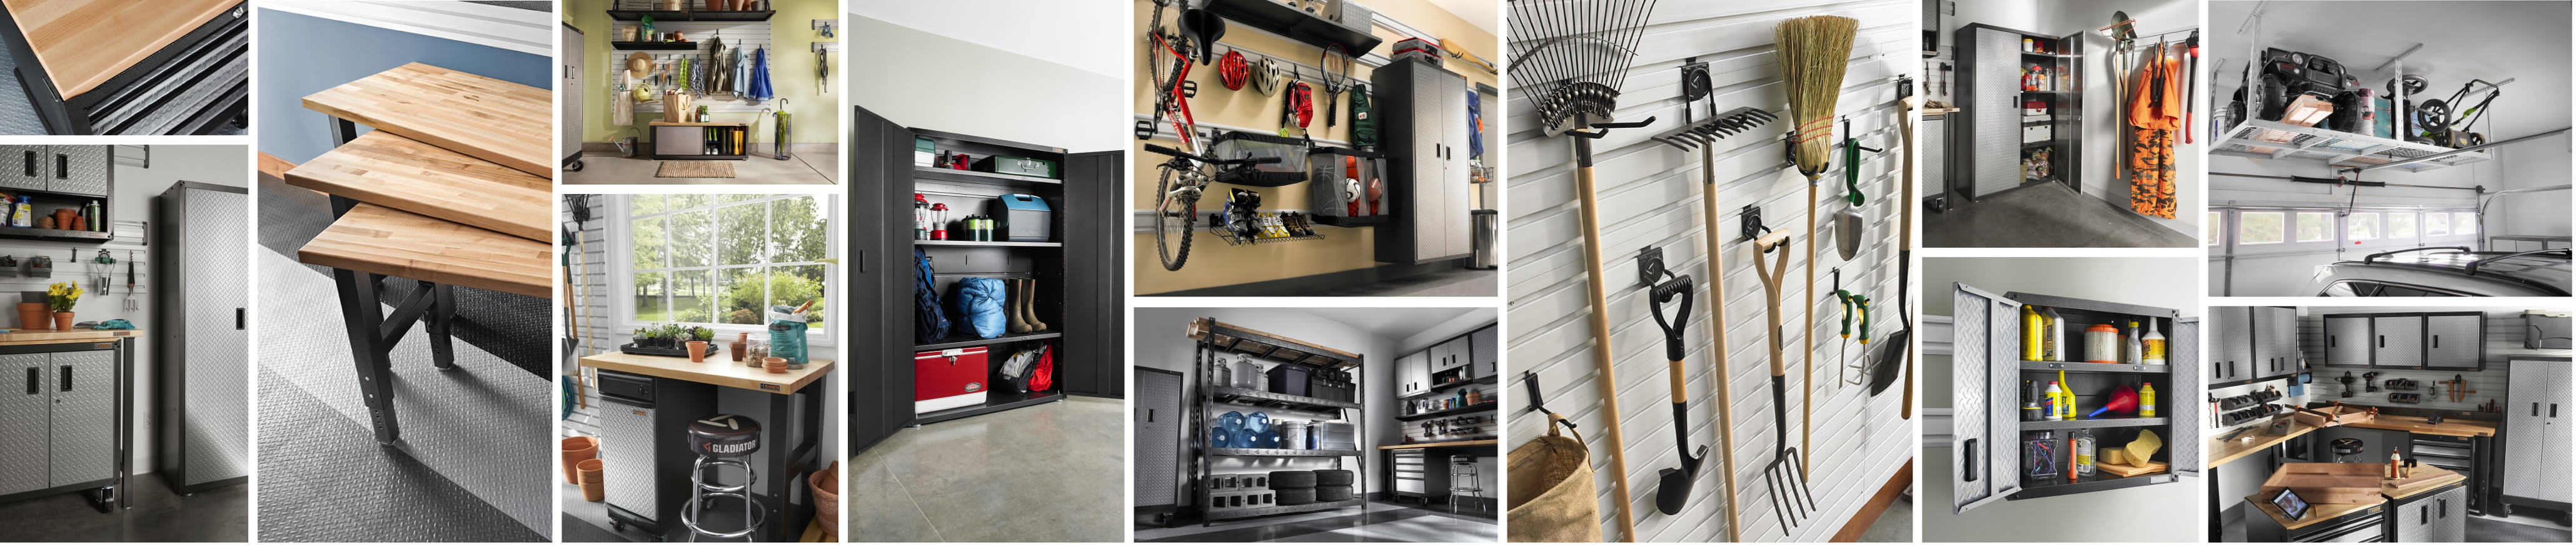 A collage of organized garage images.